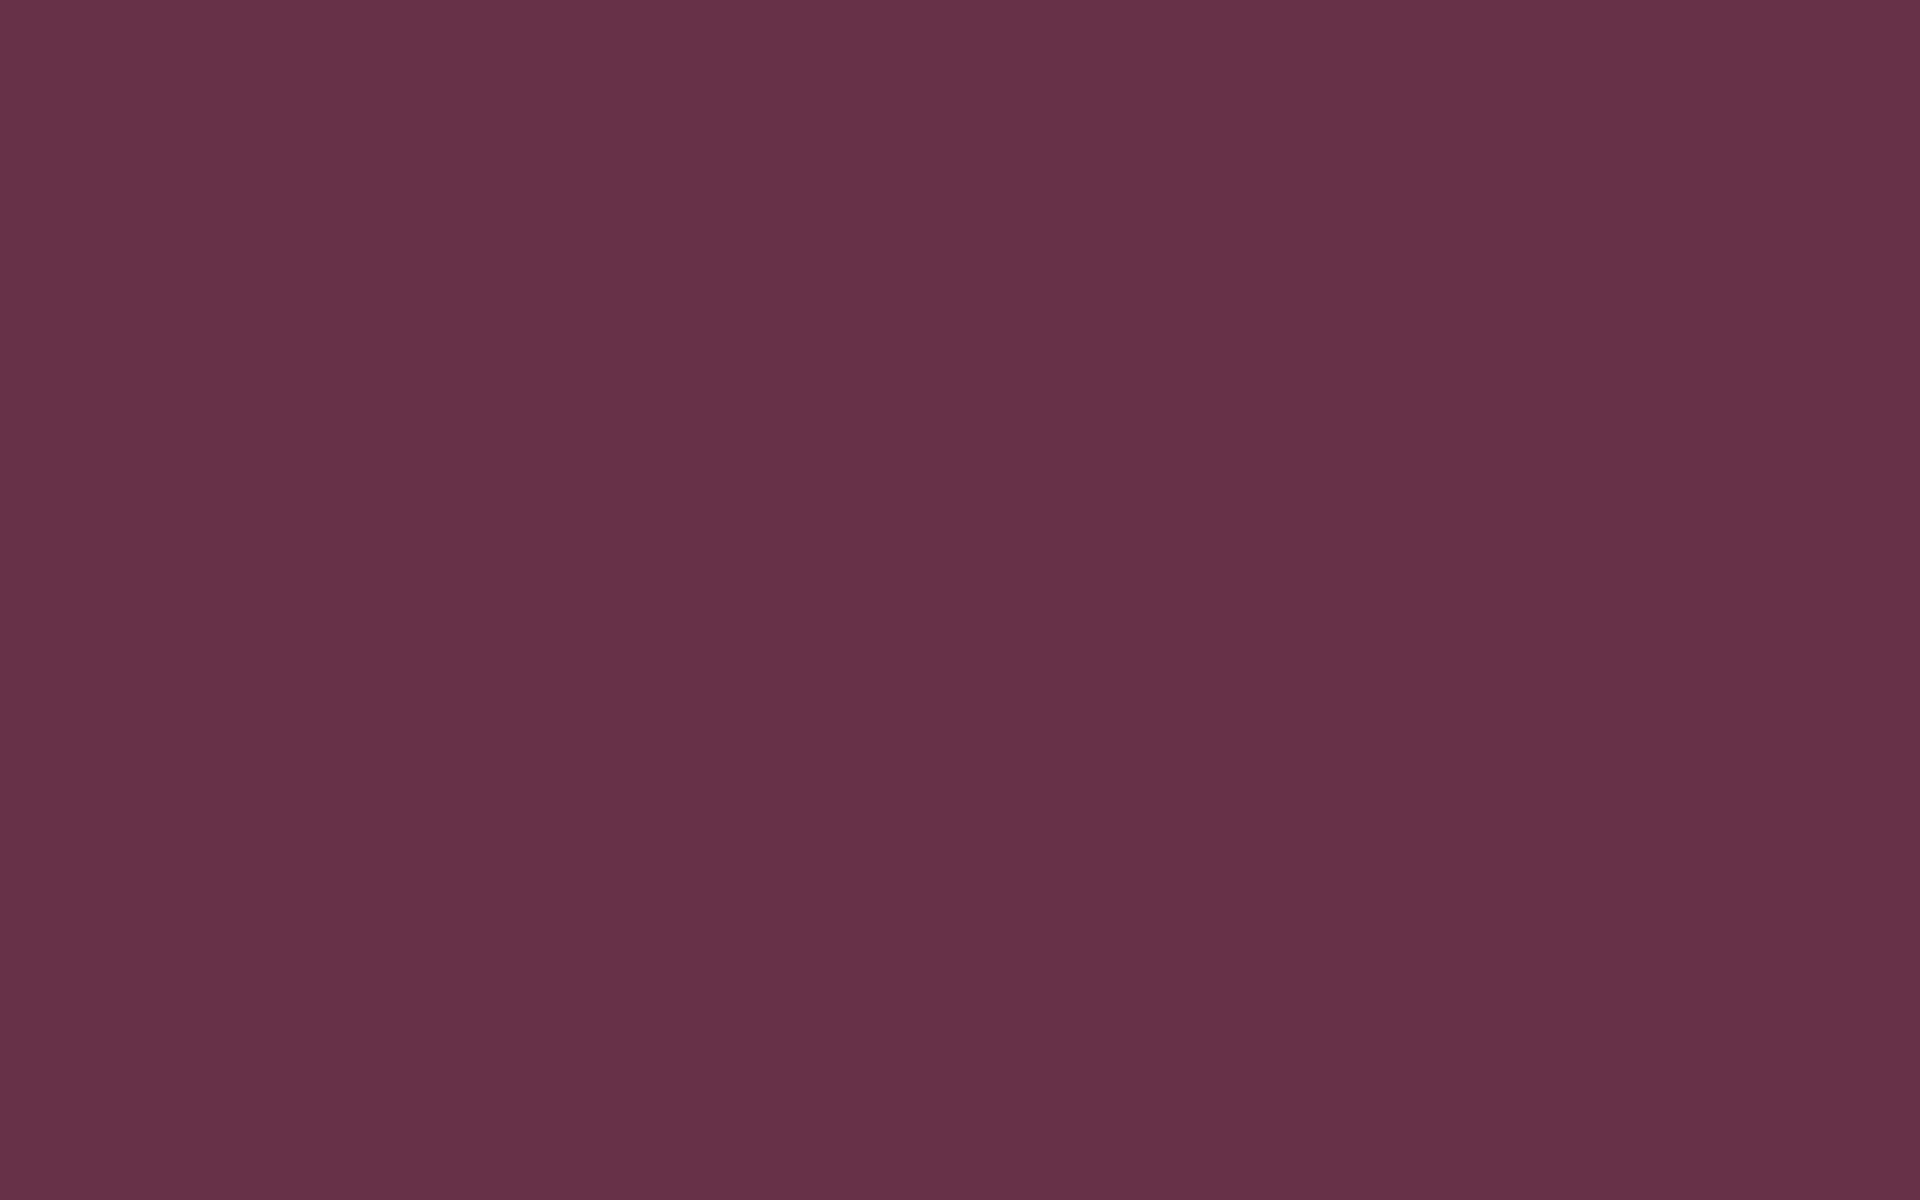 1920x1200 Wine Dregs Solid Color Background